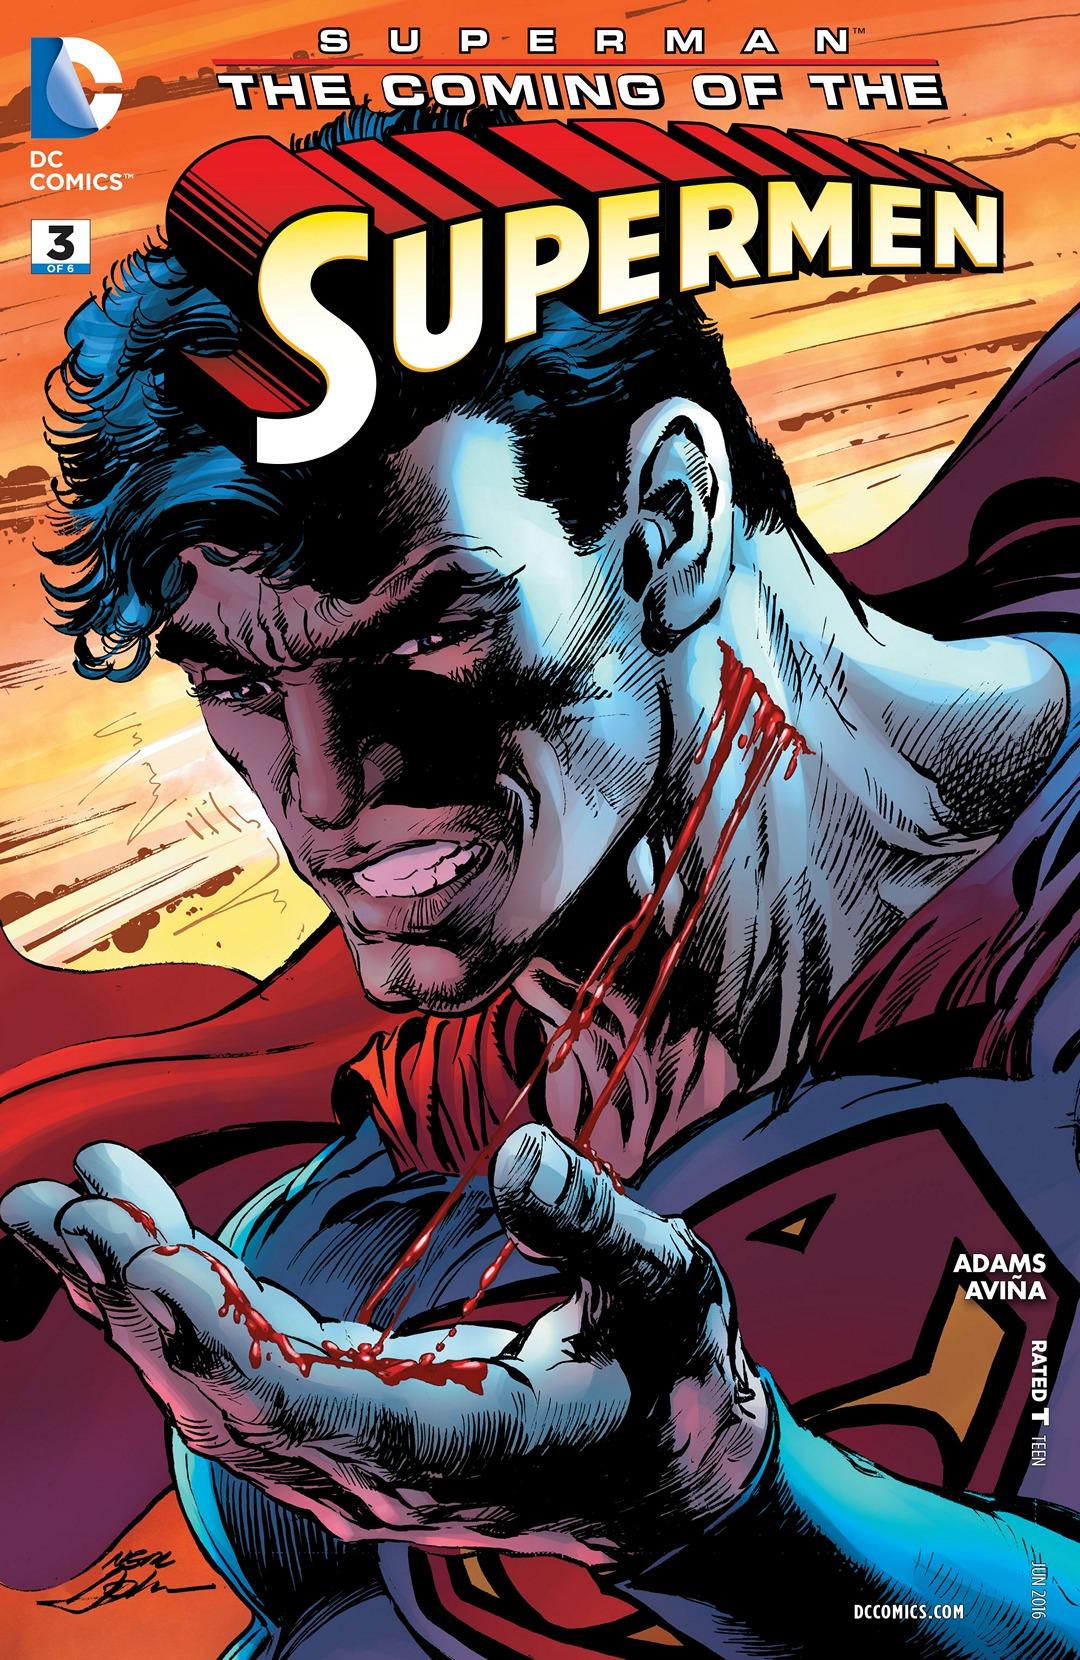 Superman: The Coming of the Supermen Vol. 1 #3